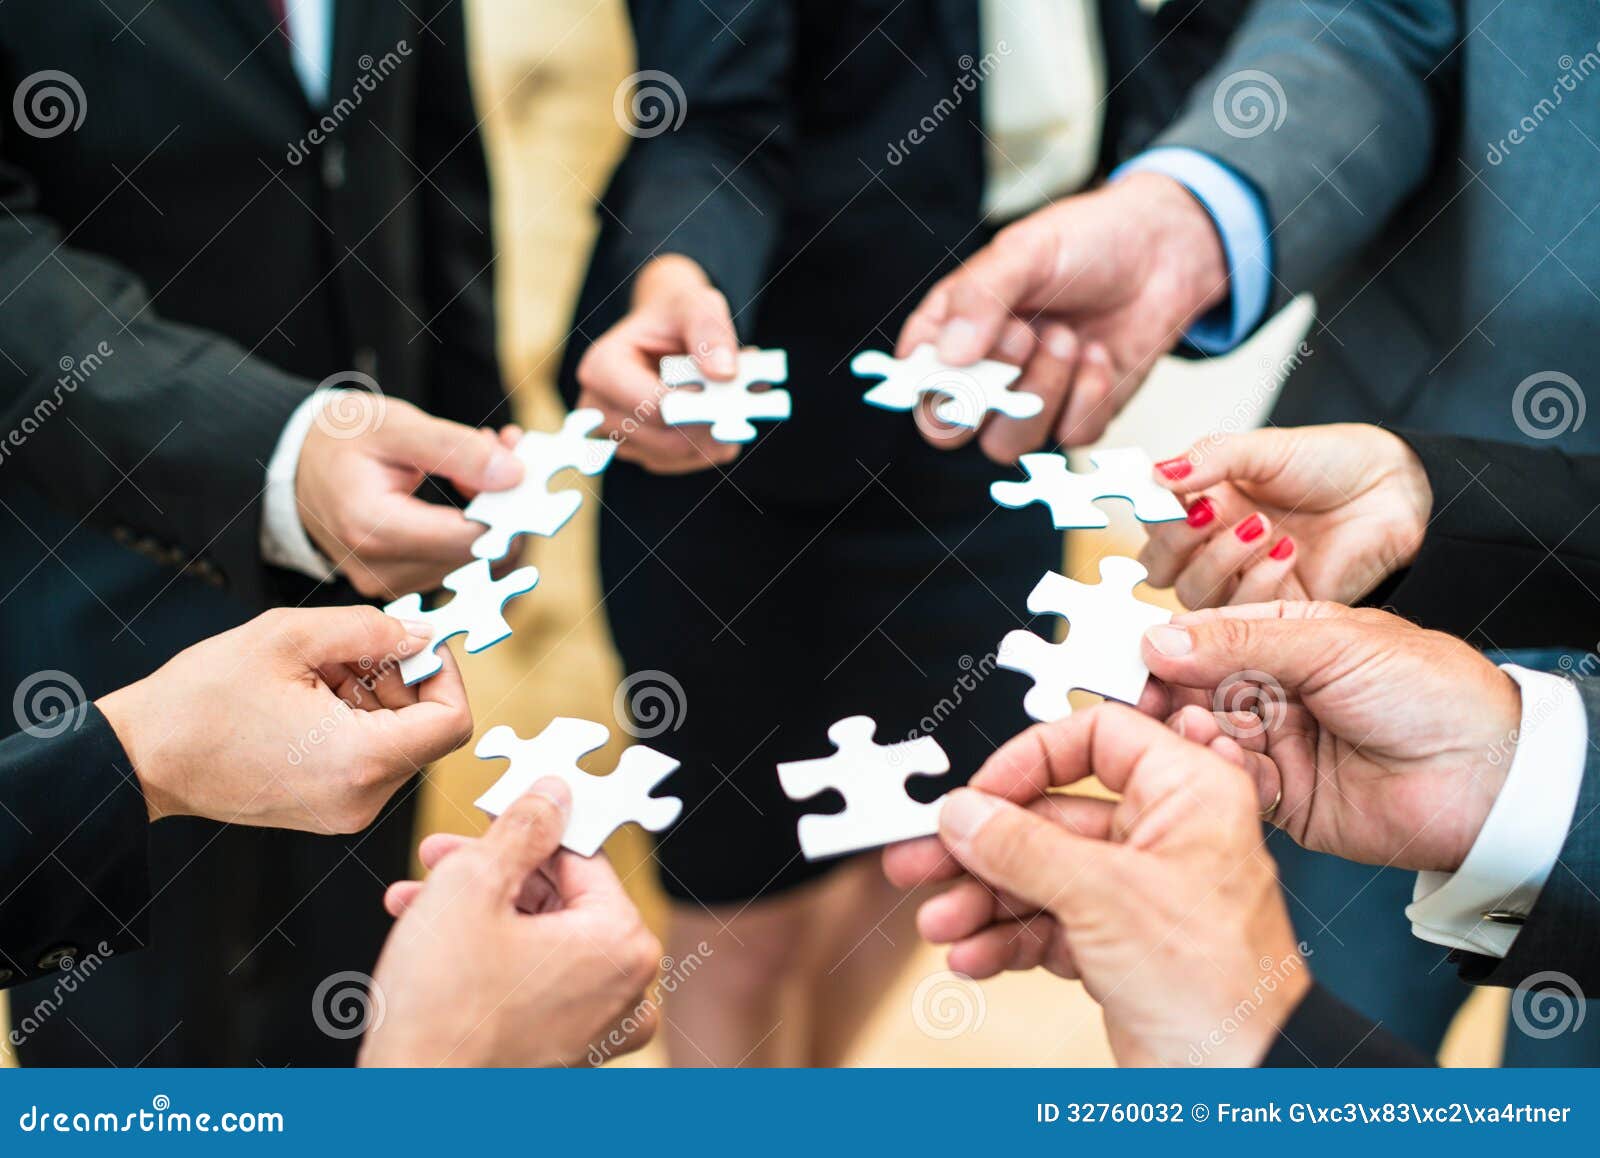 teamwork-business-people-solving-puzzle-